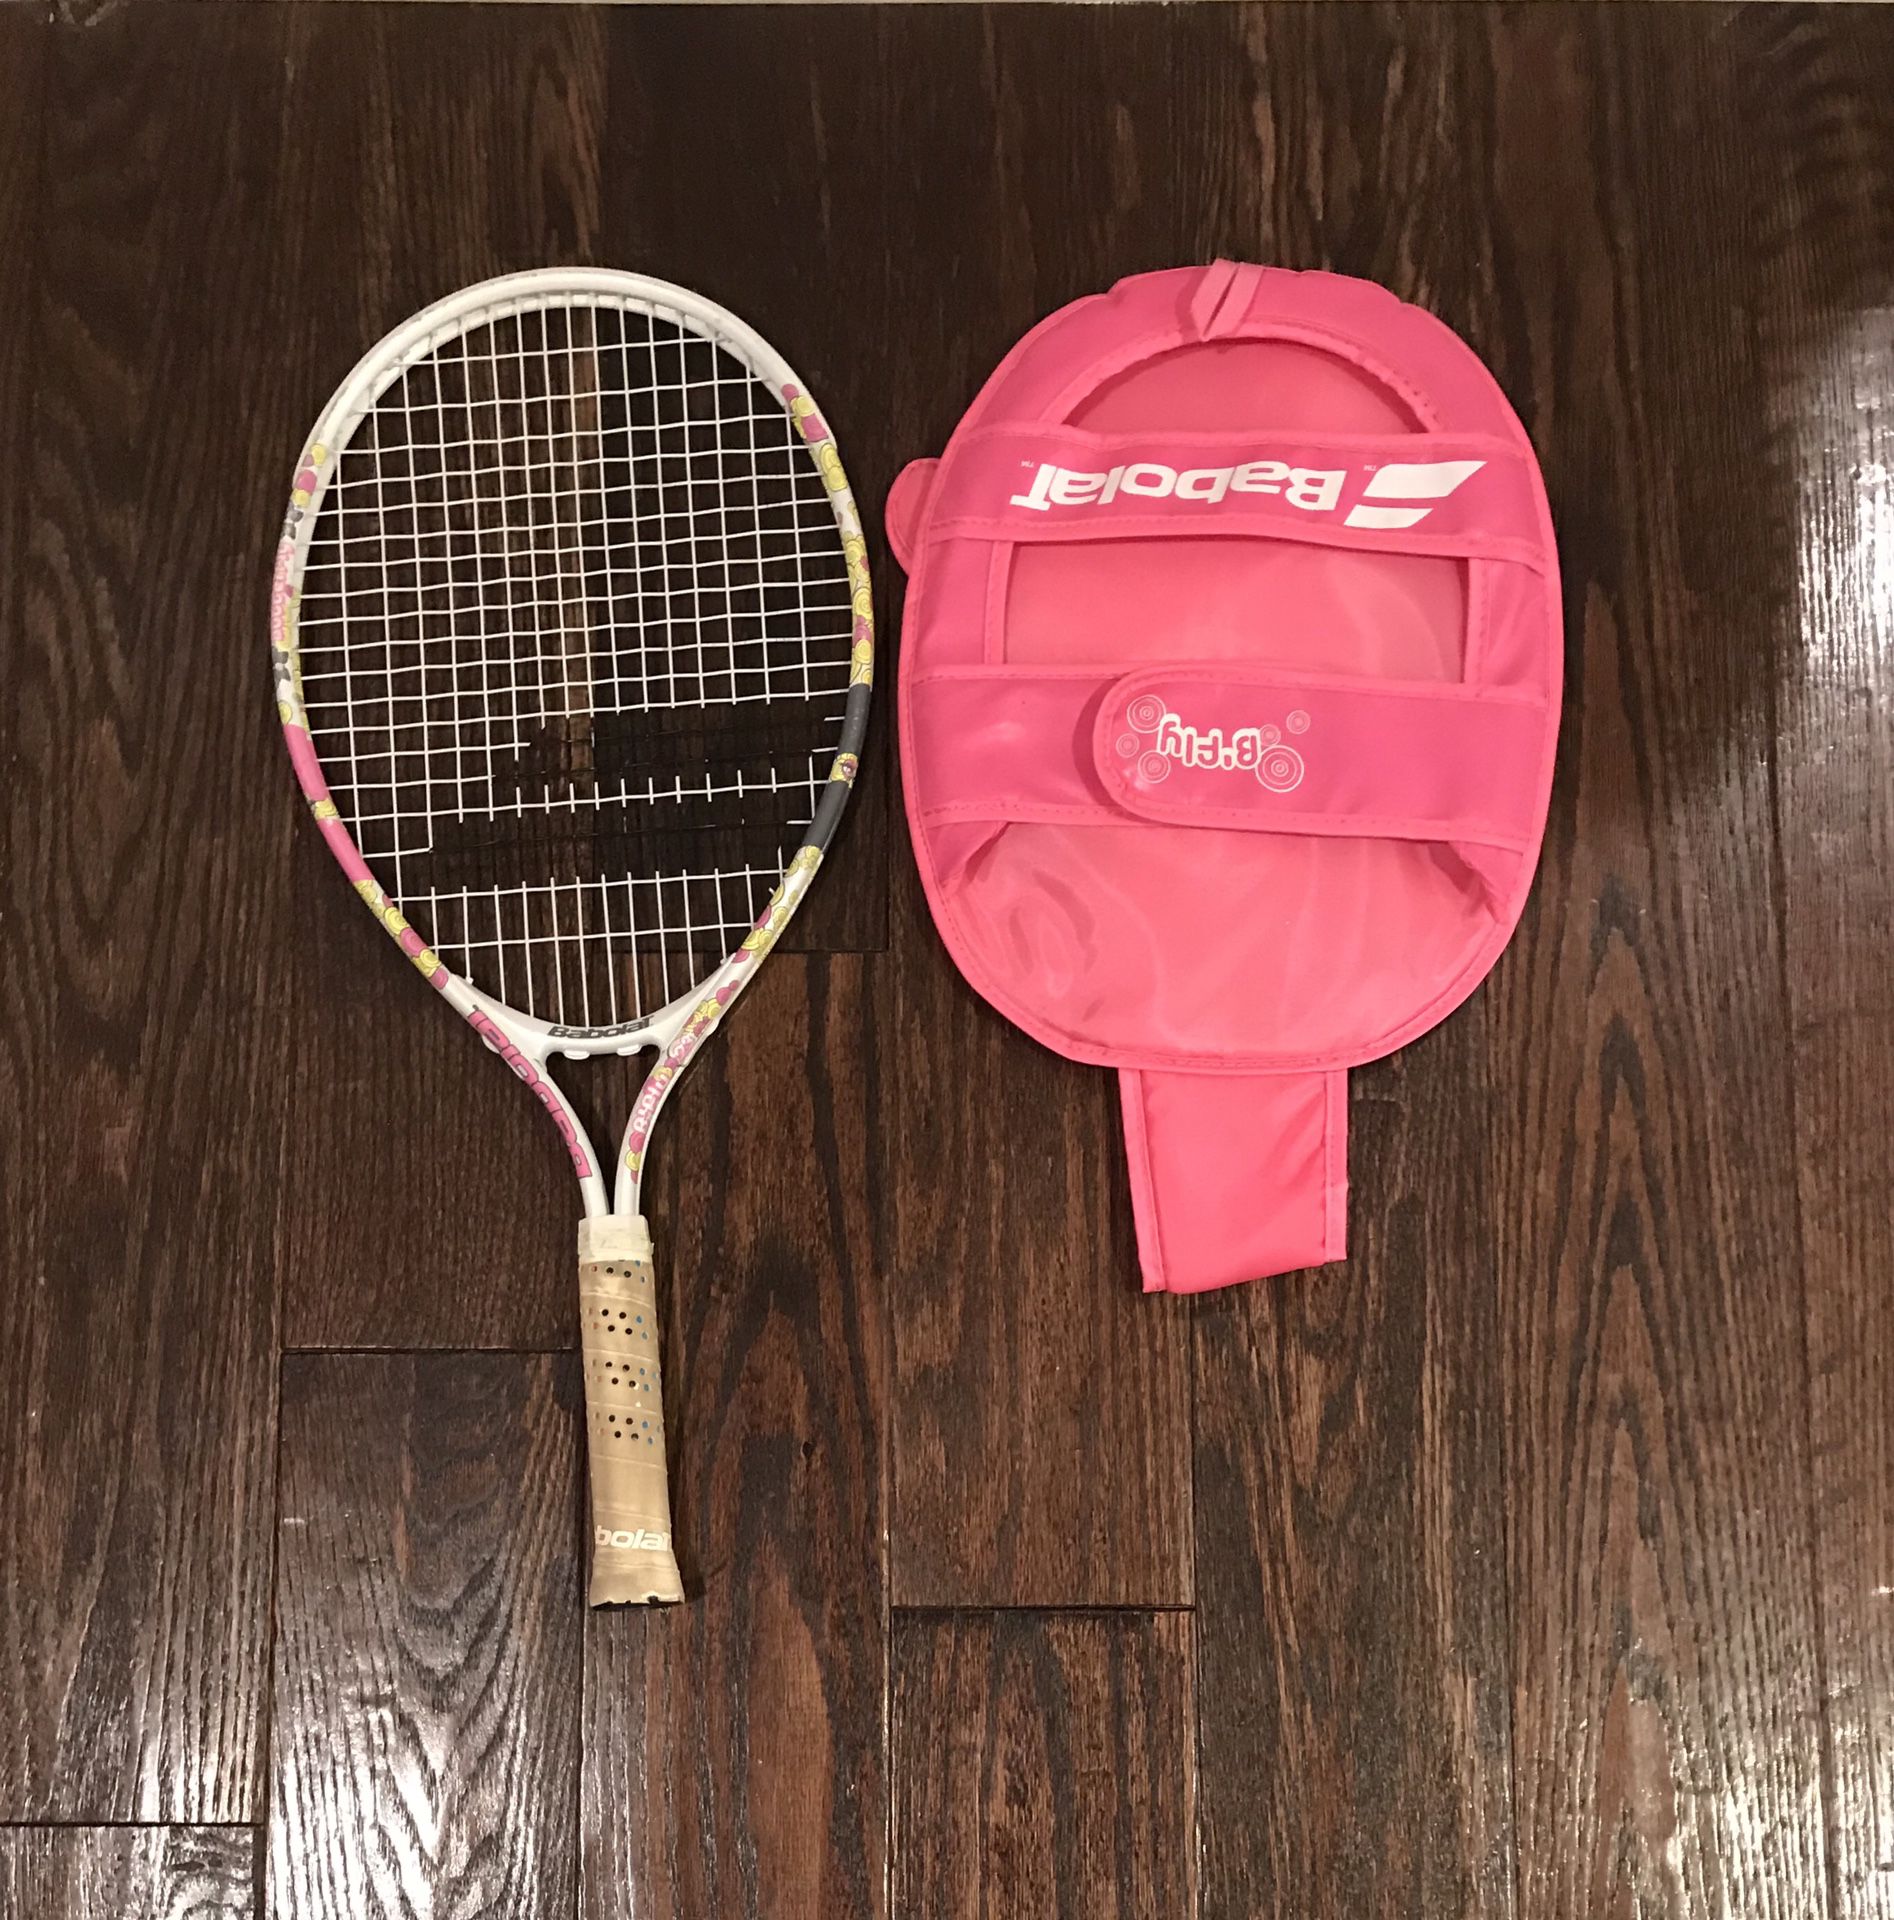 Babolat kids tennis racket with cover